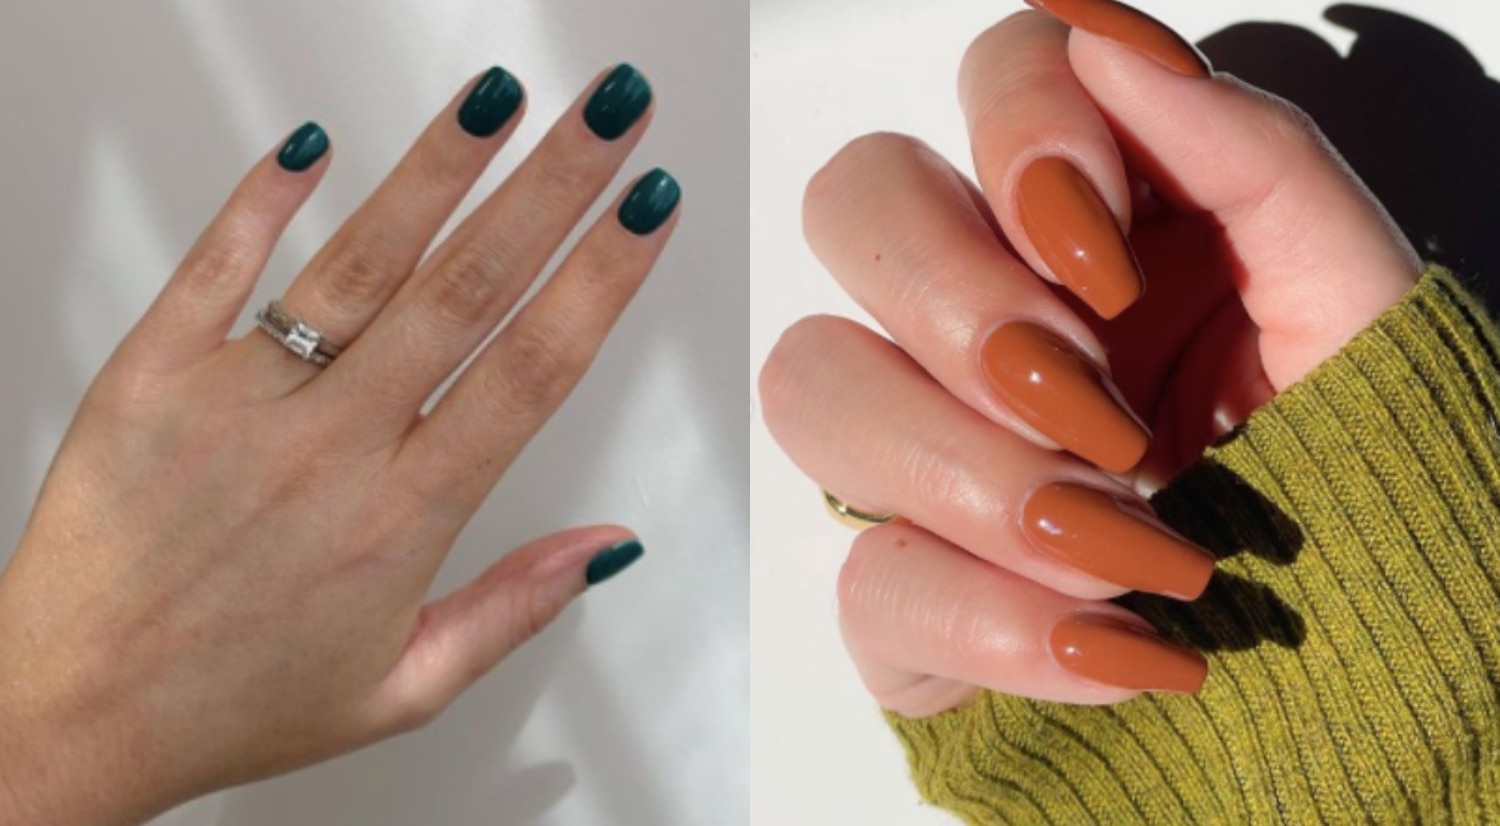 1. "Top 10 Winter Nail Colors for 2021" - wide 9